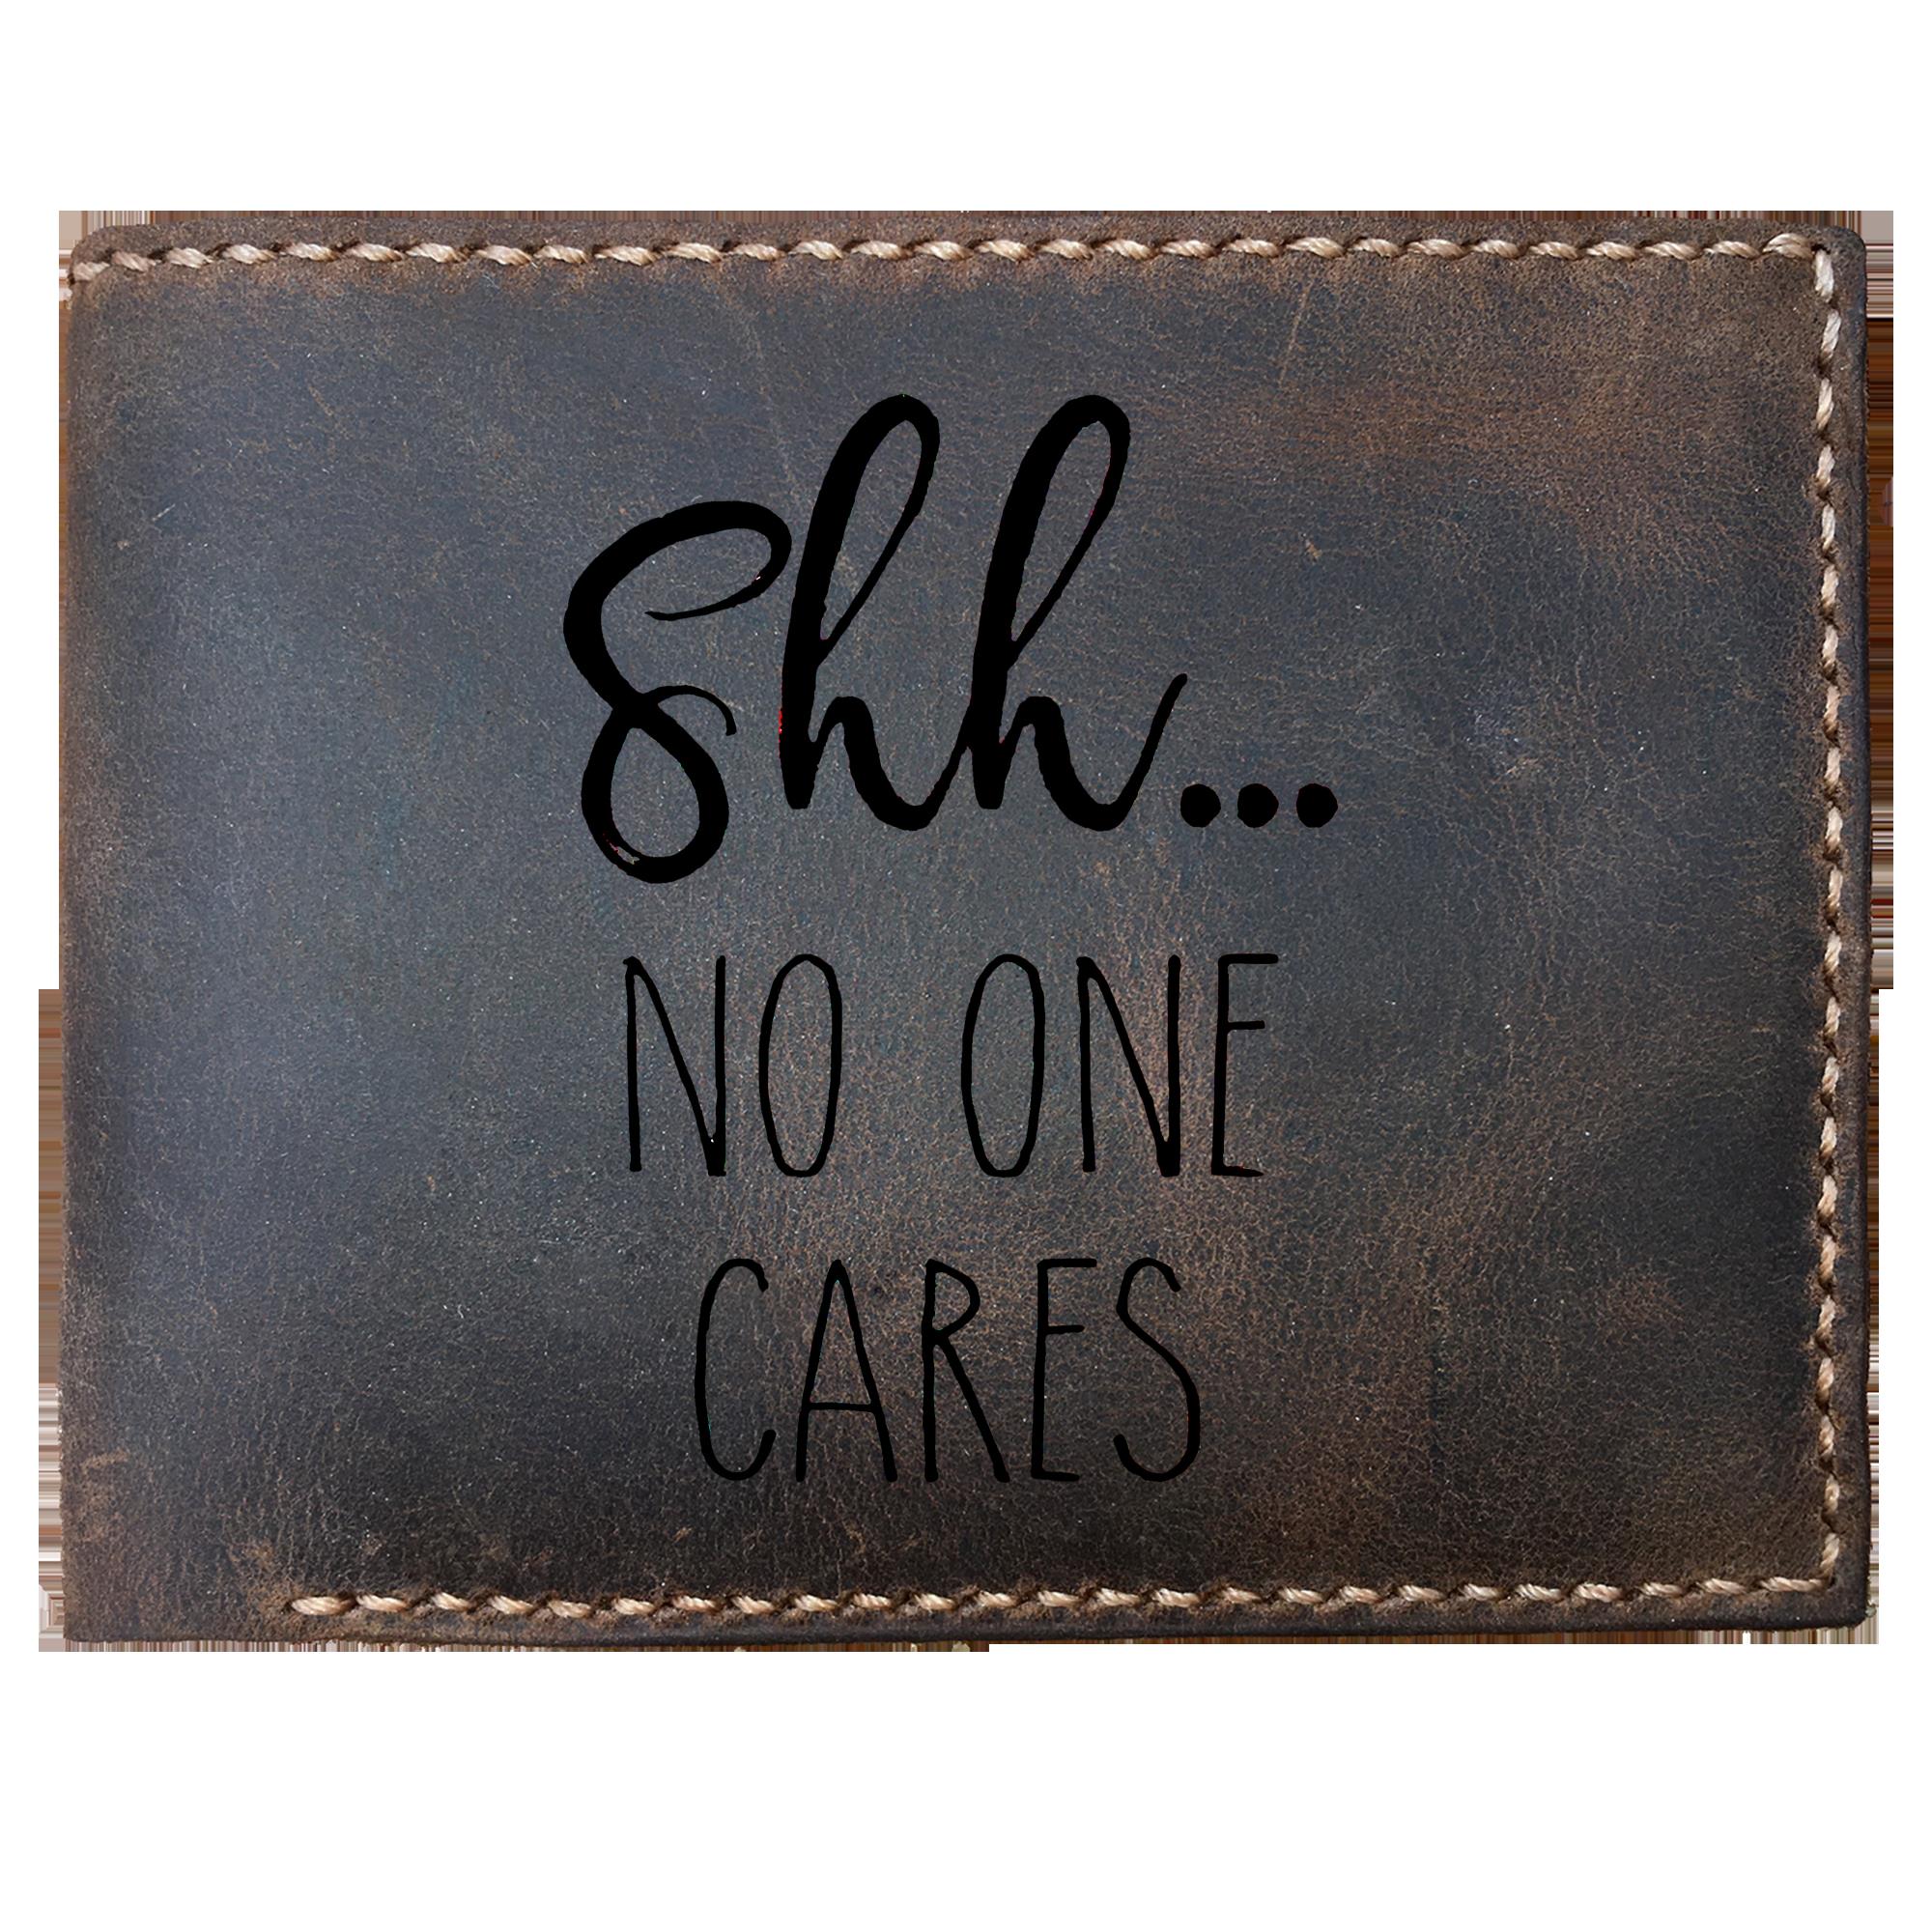 Skitongifts Funny Custom Laser Engraved Bifold Leather Wallet For Men, Shh. No One Cares